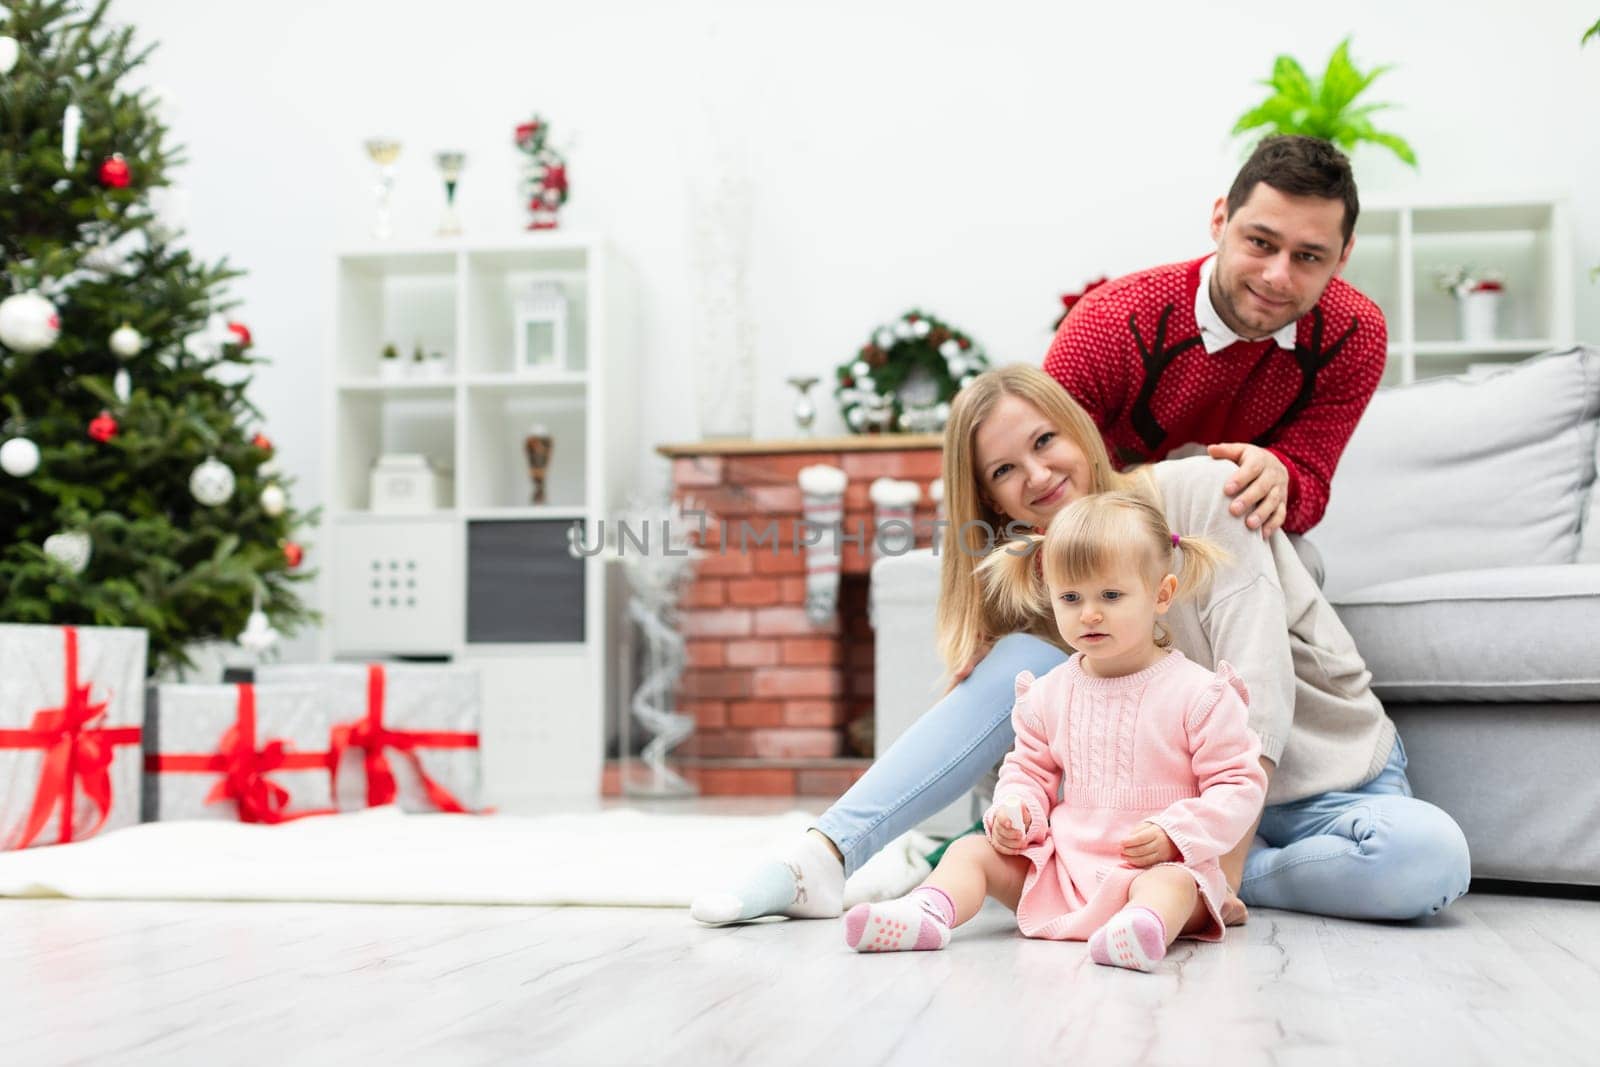 Parents with their little daughter are sitting on the floor in a bright room. In the background you can see a brick fireplace, lots of Christmas decorations and a Christmas tree. Under the Christmas tree stand large boxes of gifts.